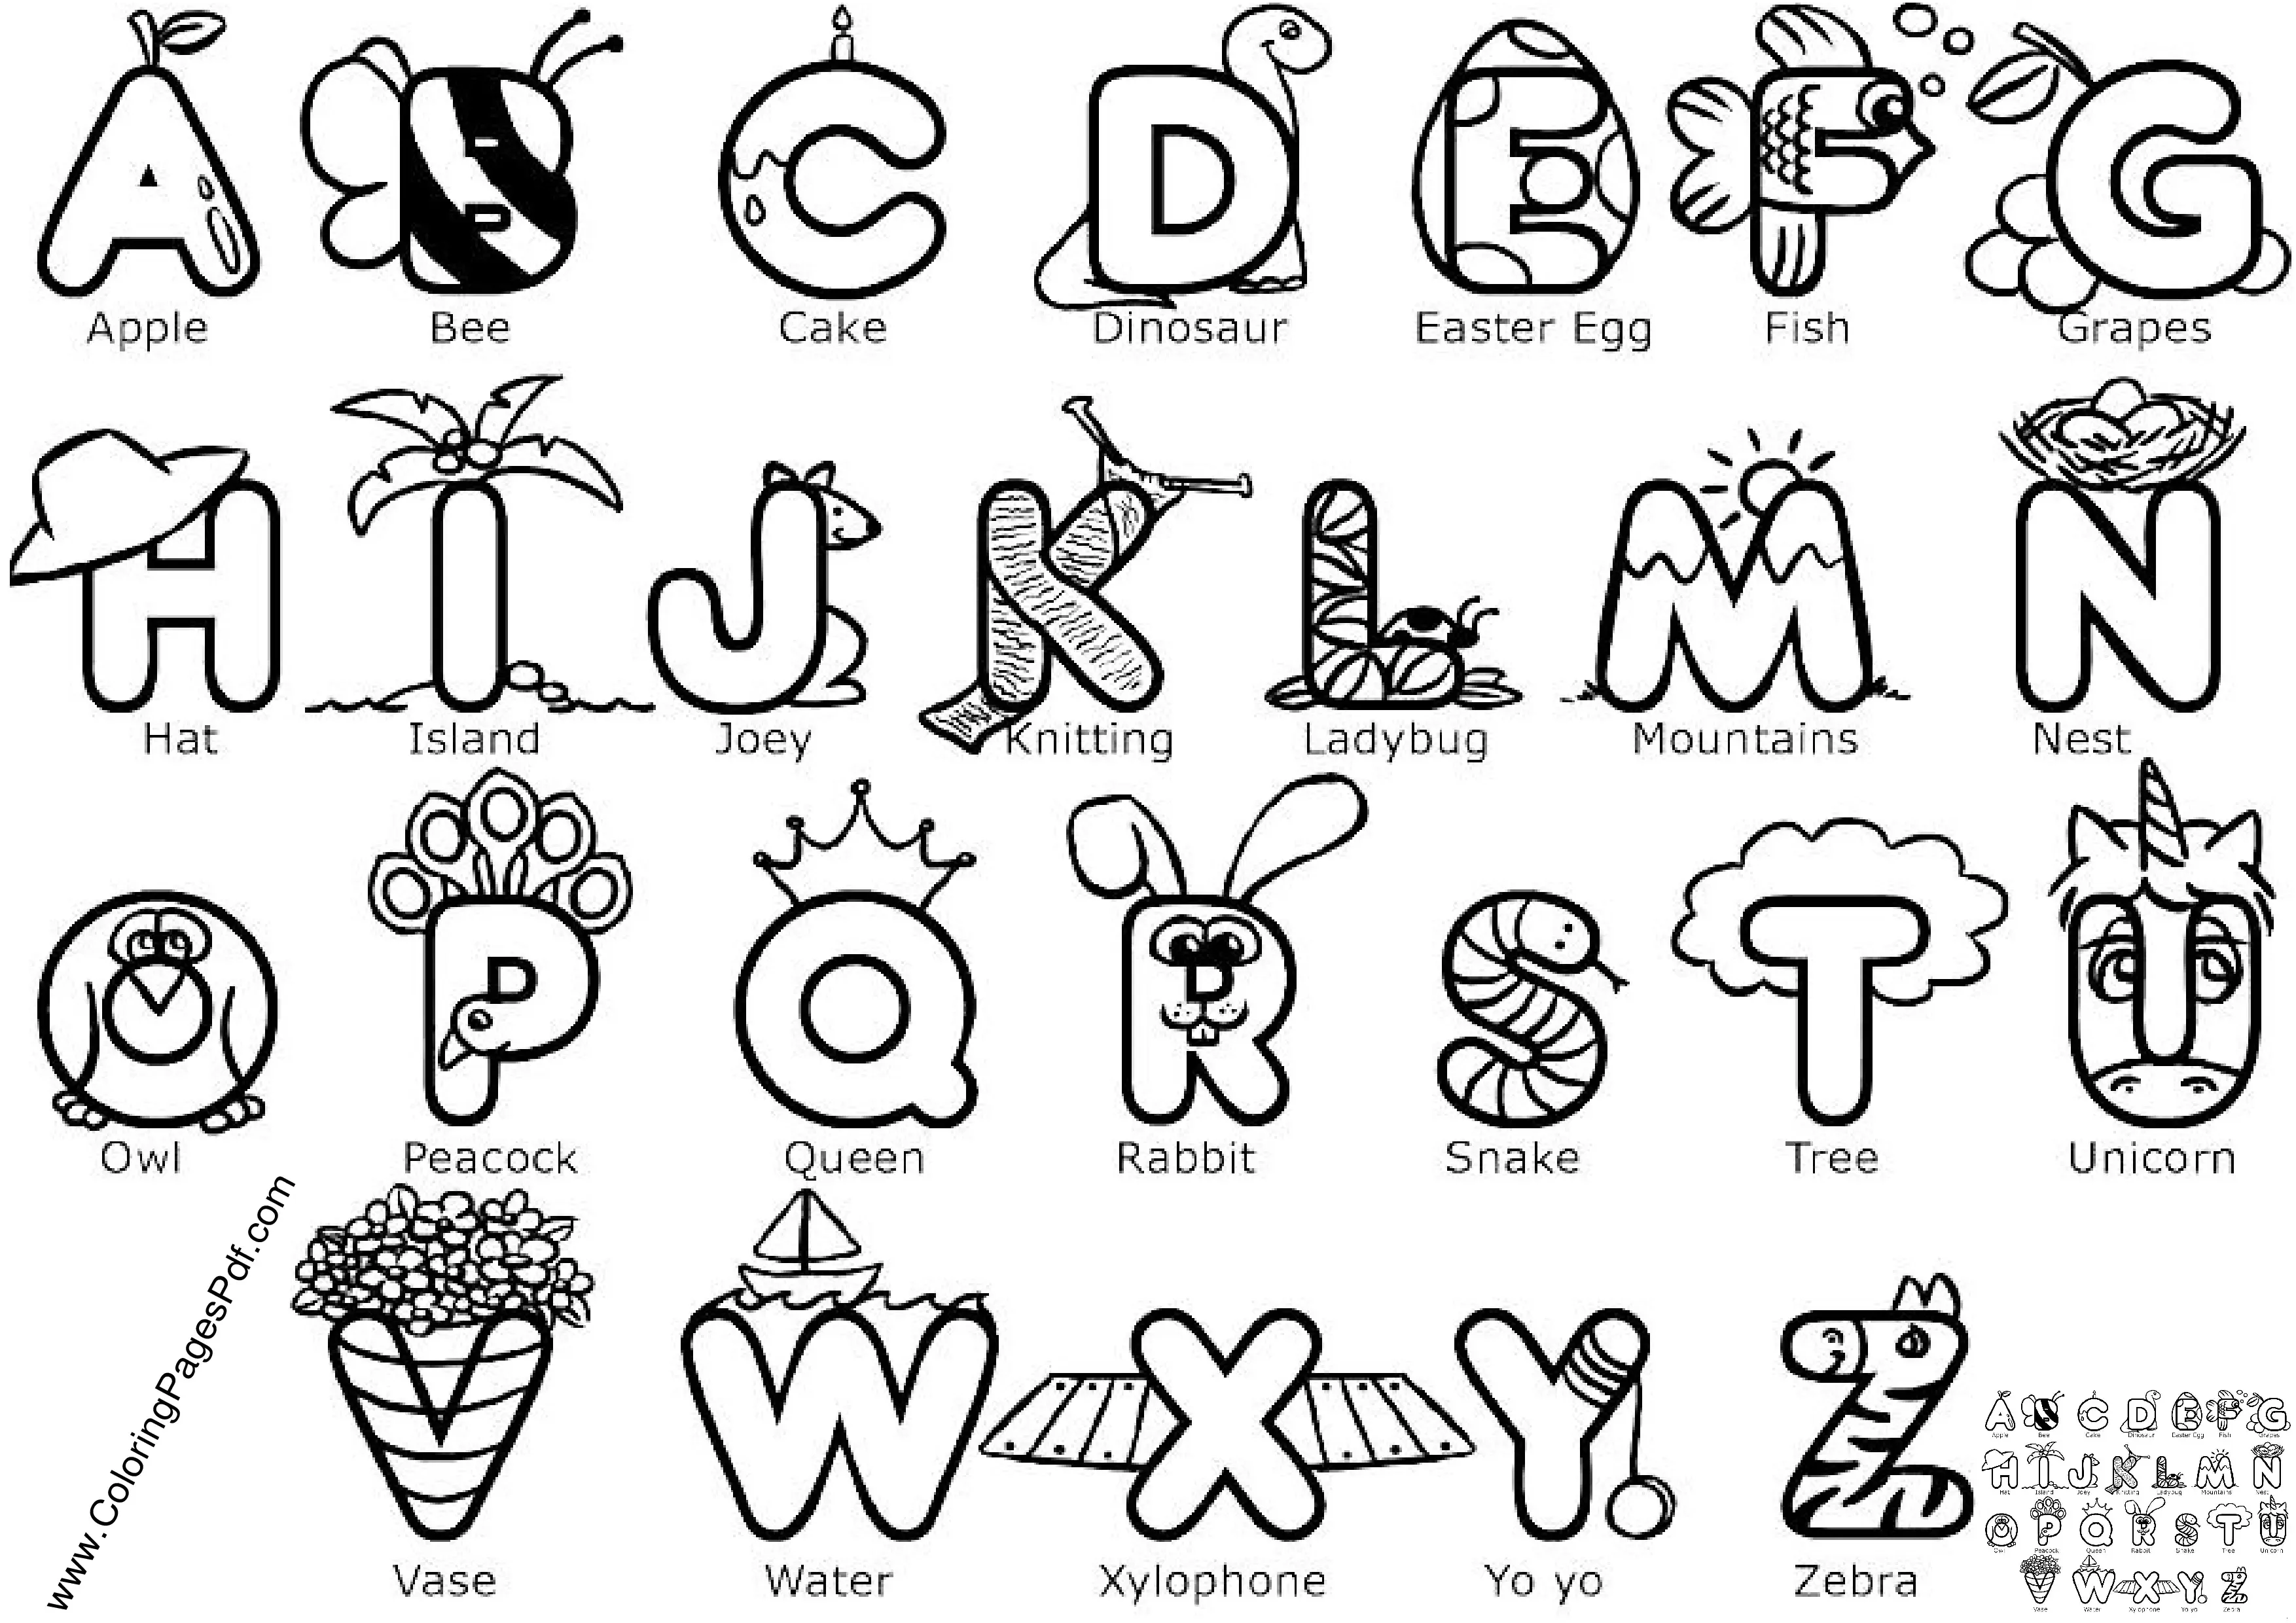 Alphabet coloring pages for adults